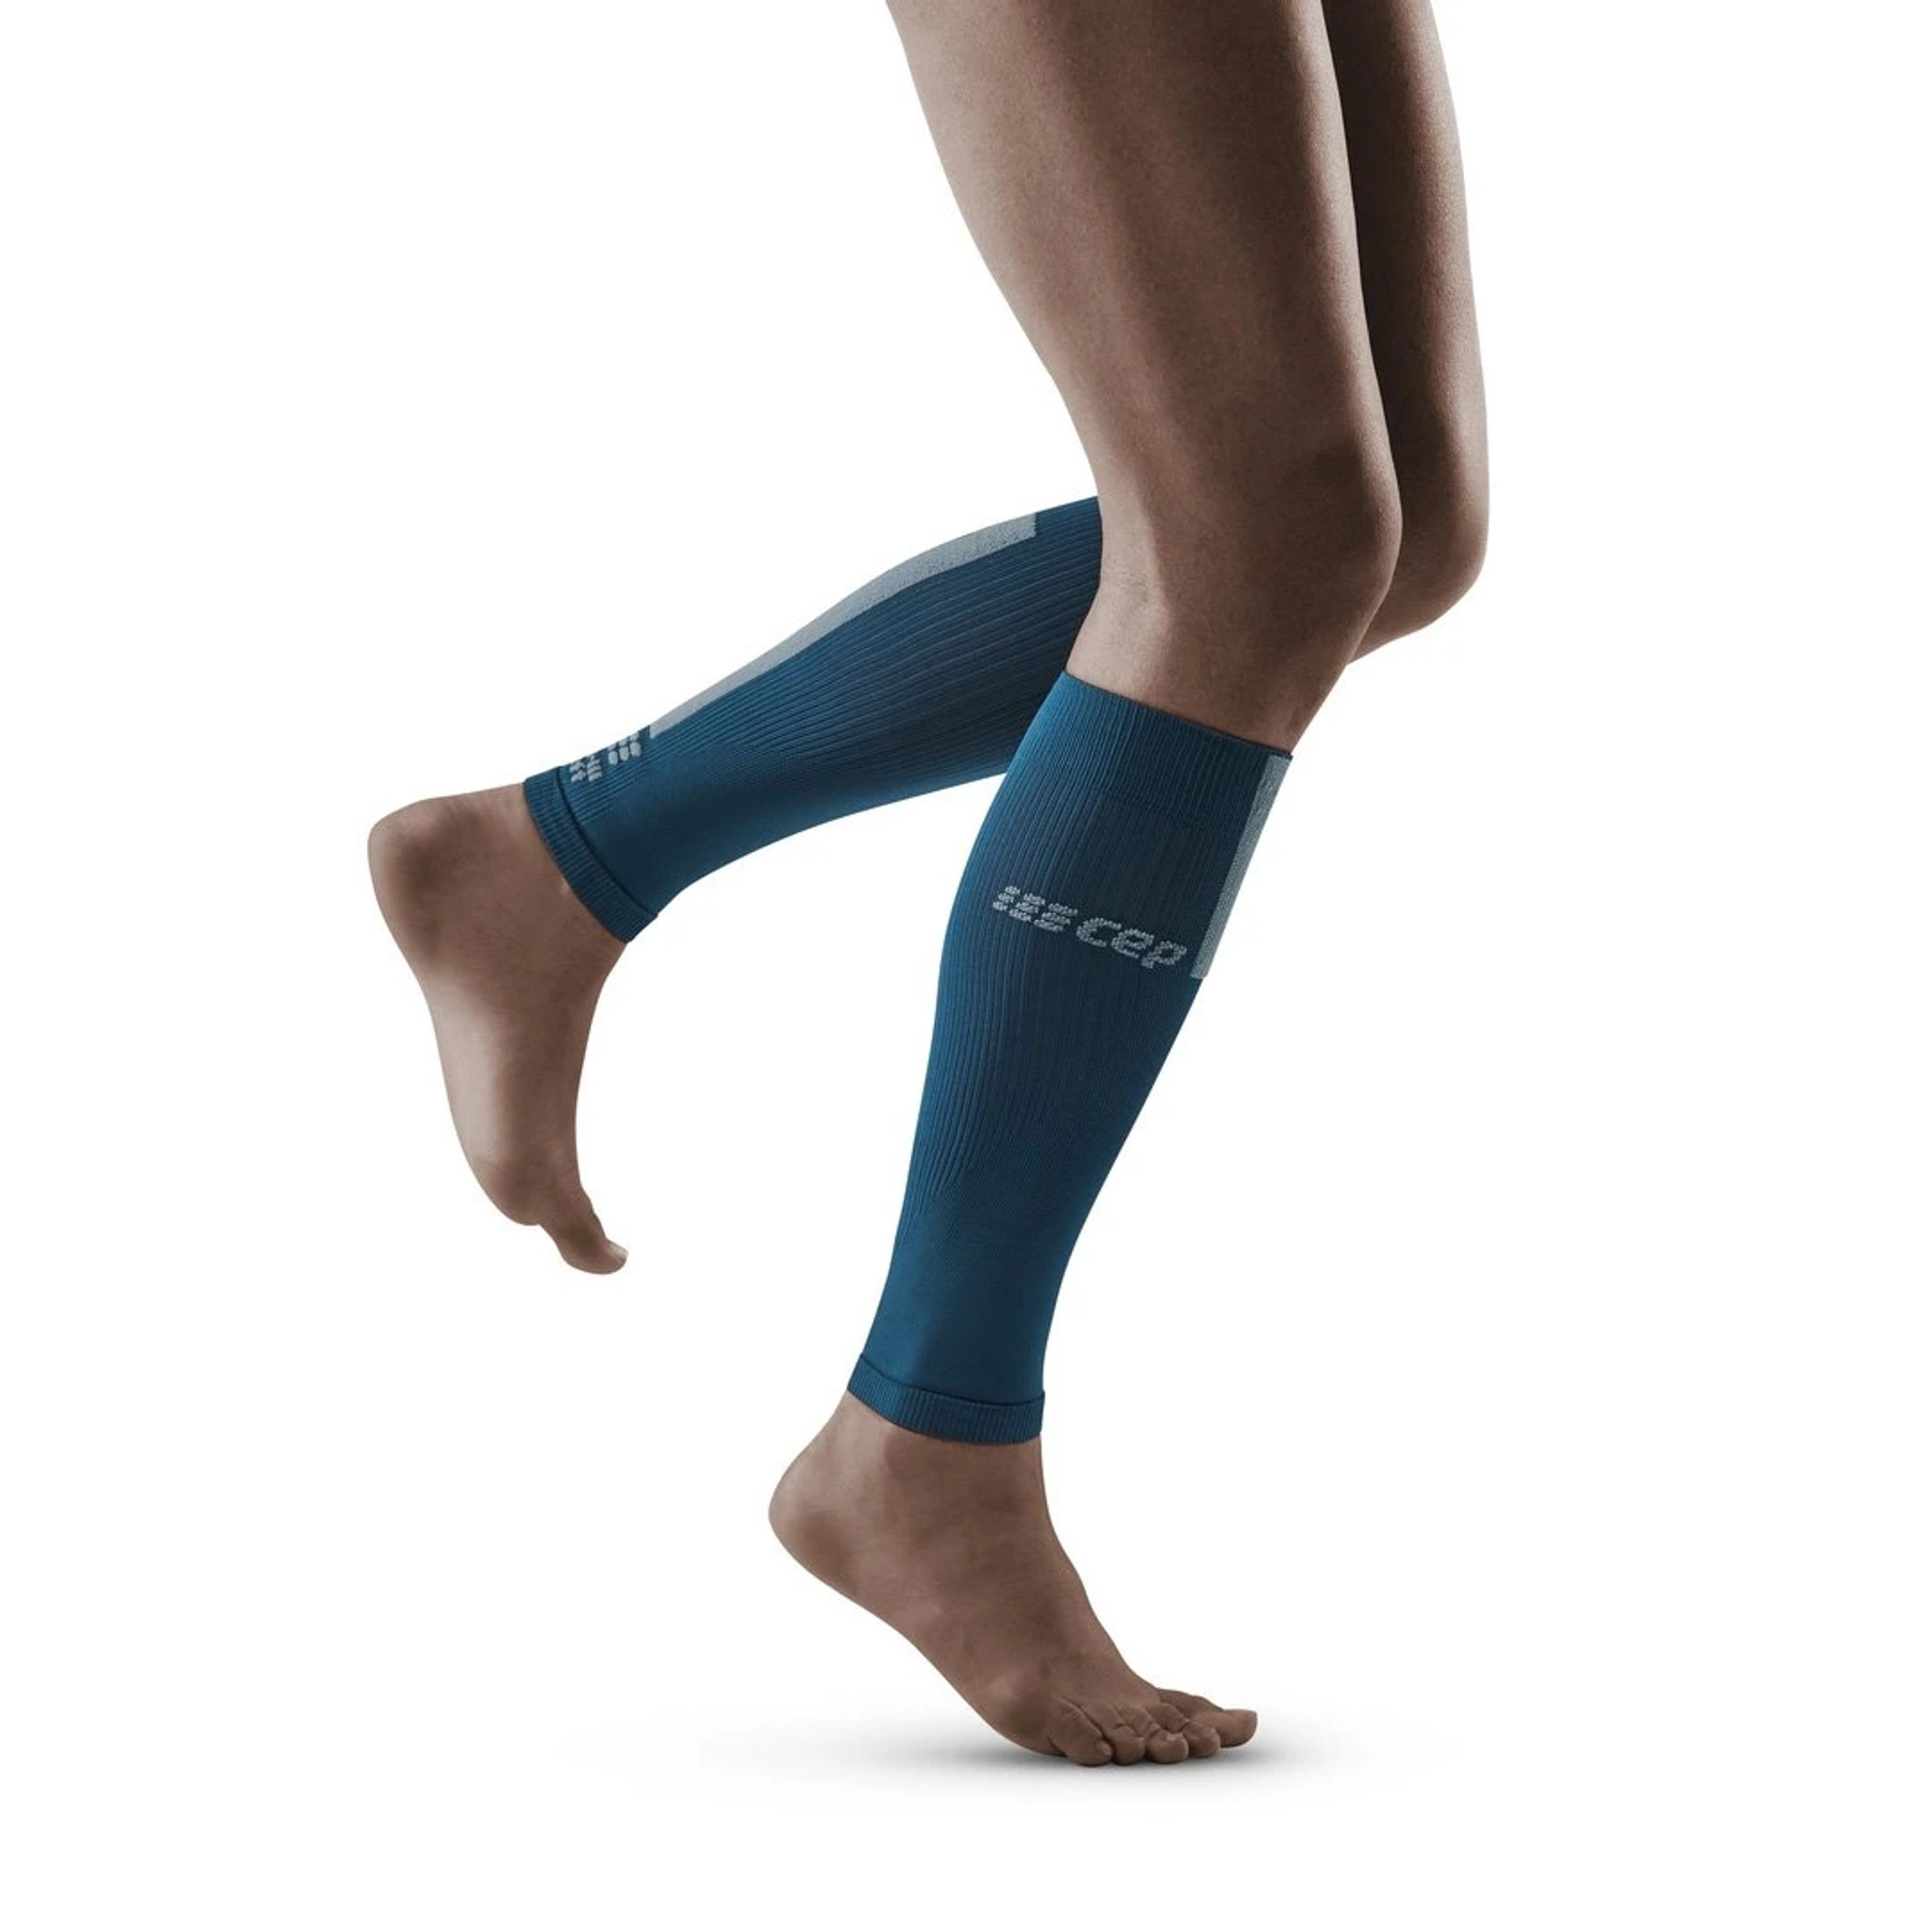 https://cdn11.bigcommerce.com/s-79bvd/images/stencil/2048x2048/products/37472/57053/Run-Calf-Sleeves-3-0-blue-grey-WS40DX-w-front-model-web_1800x1800__84792.1623696975.jpg?c=2